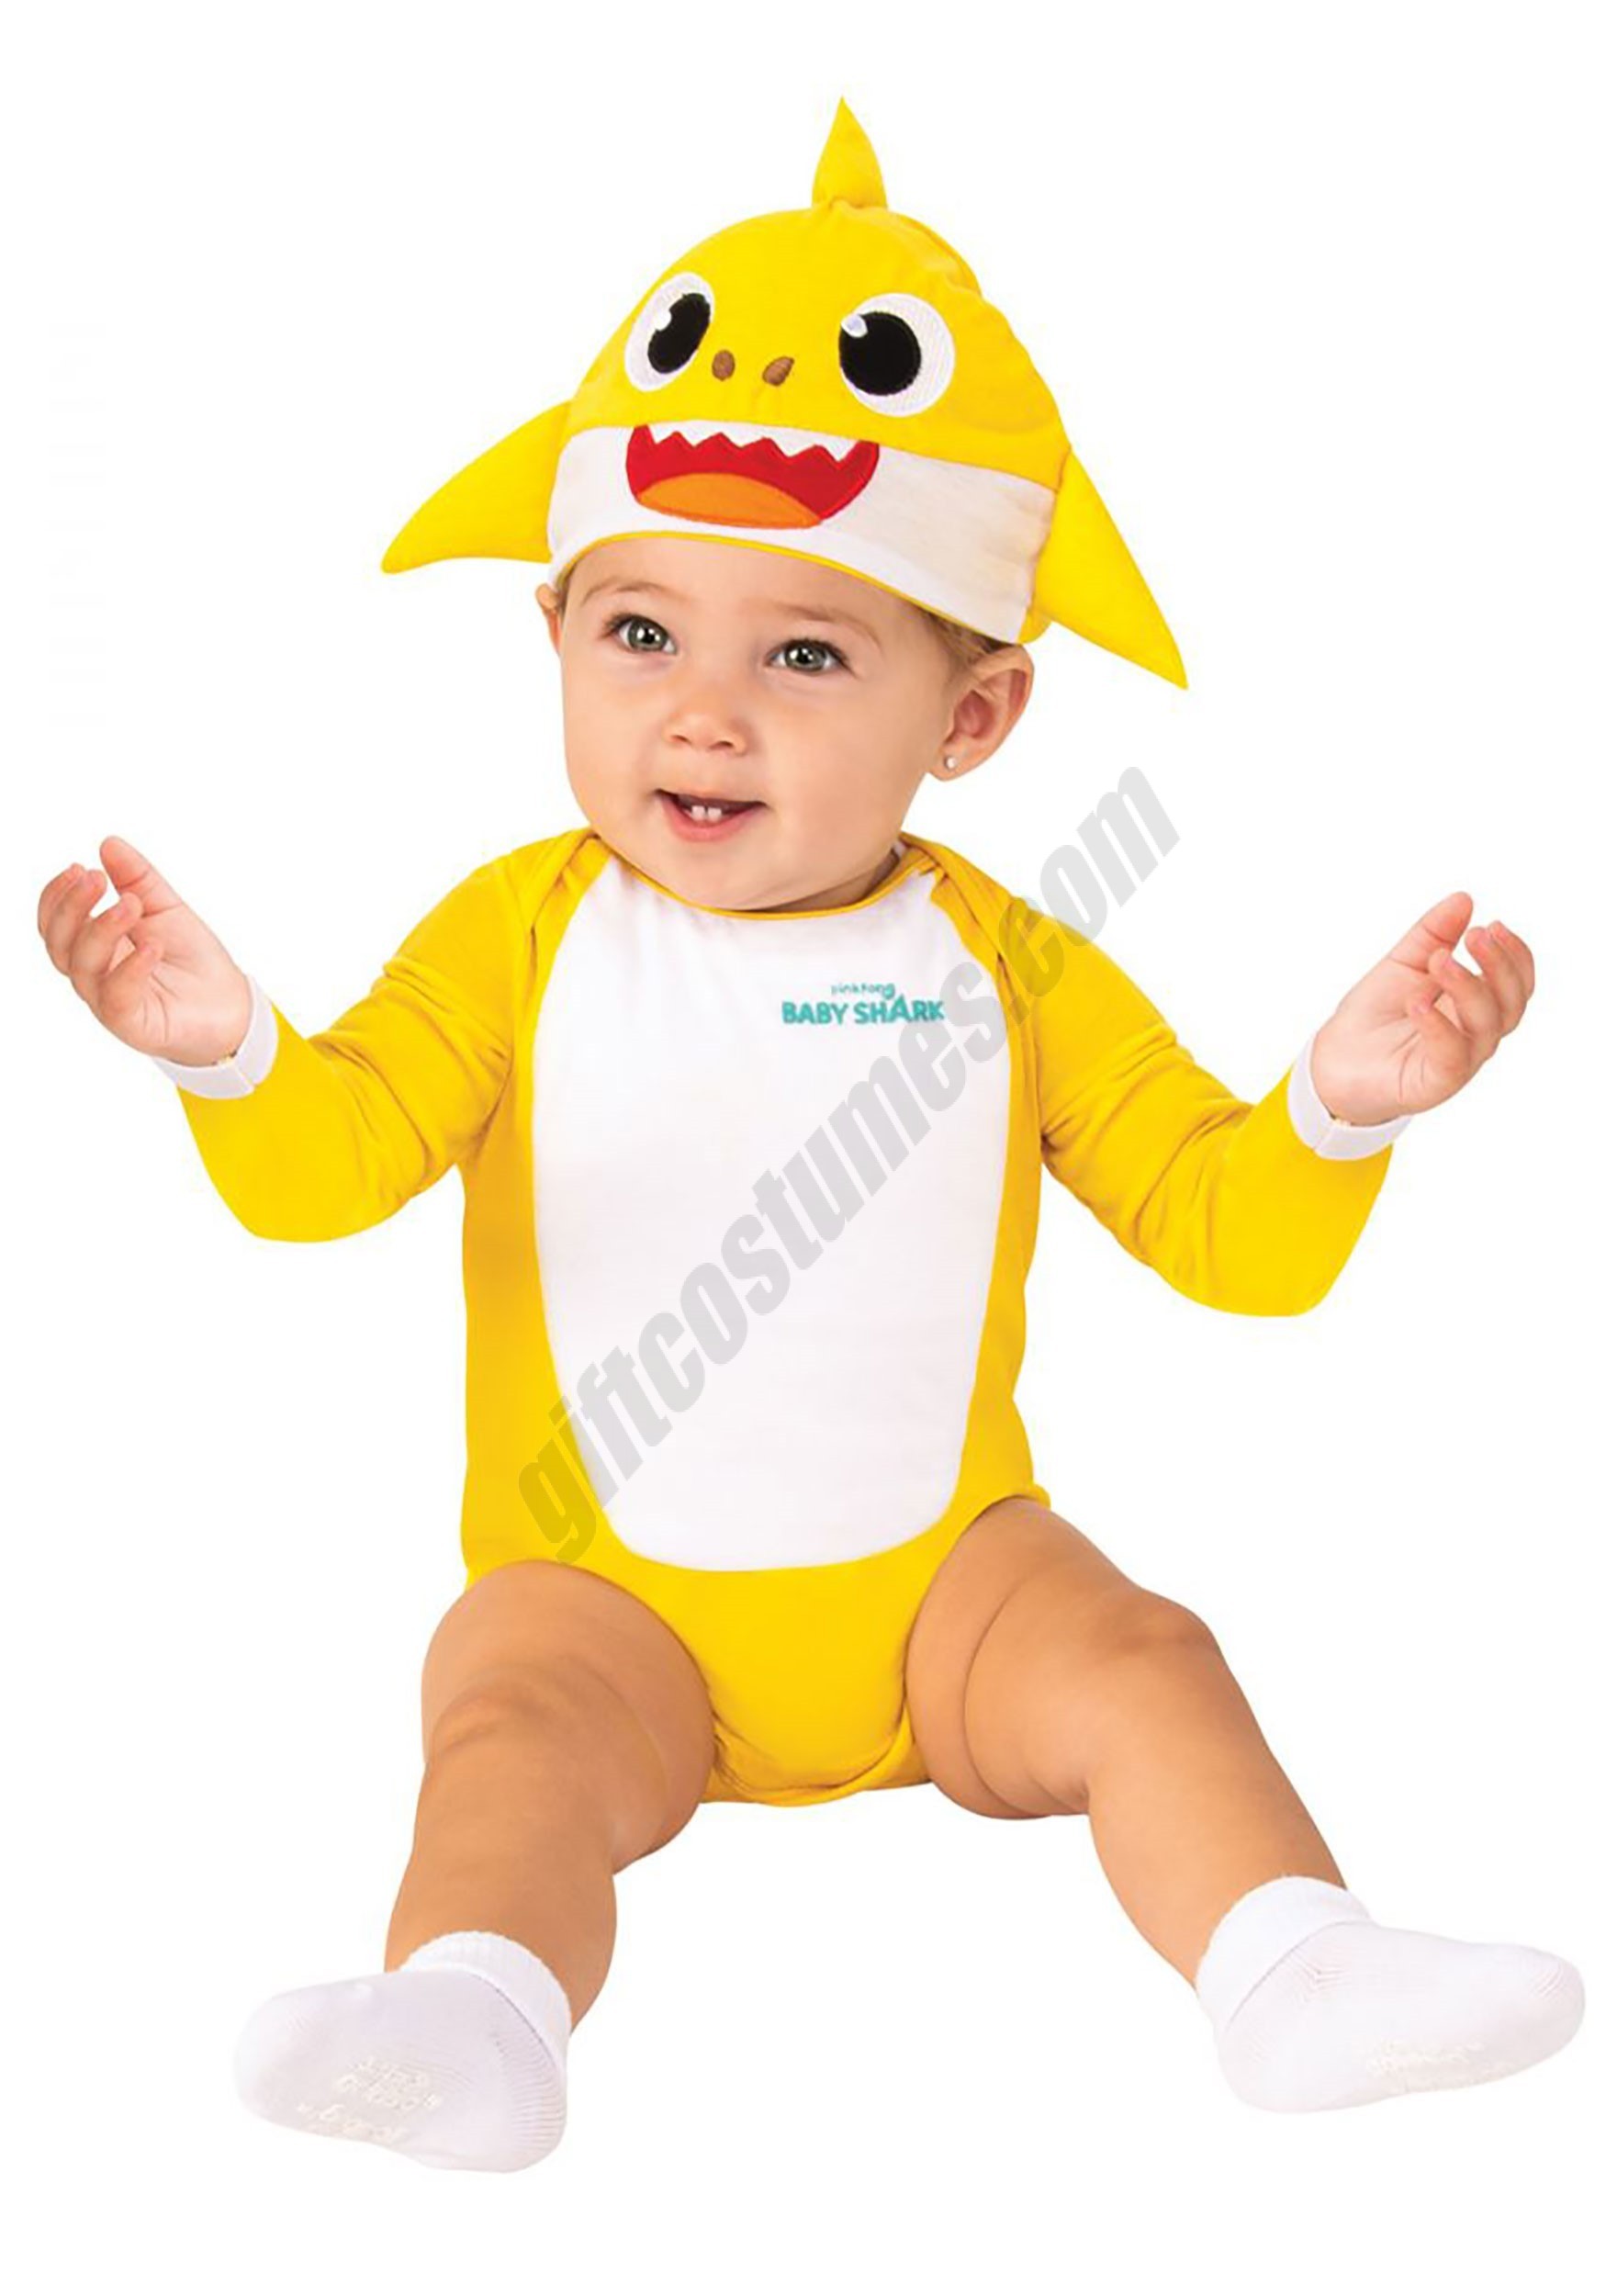 Baby Shark Costume for Infants Promotions - Baby Shark Costume for Infants Promotions